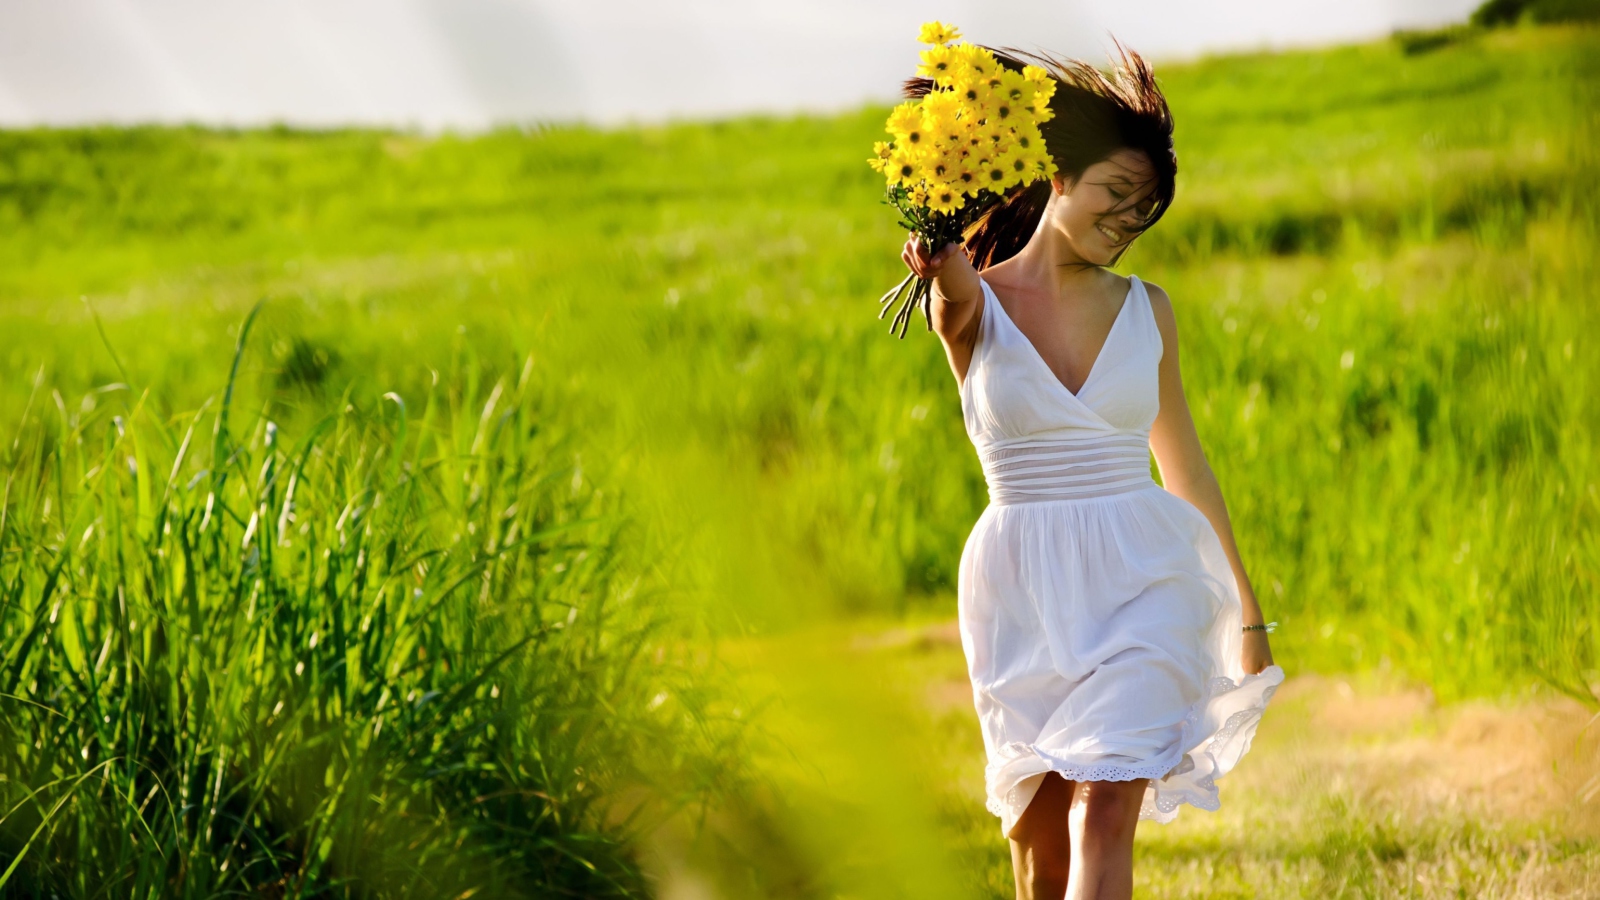 Girl With Yellow Flowers In Field wallpaper 1600x900